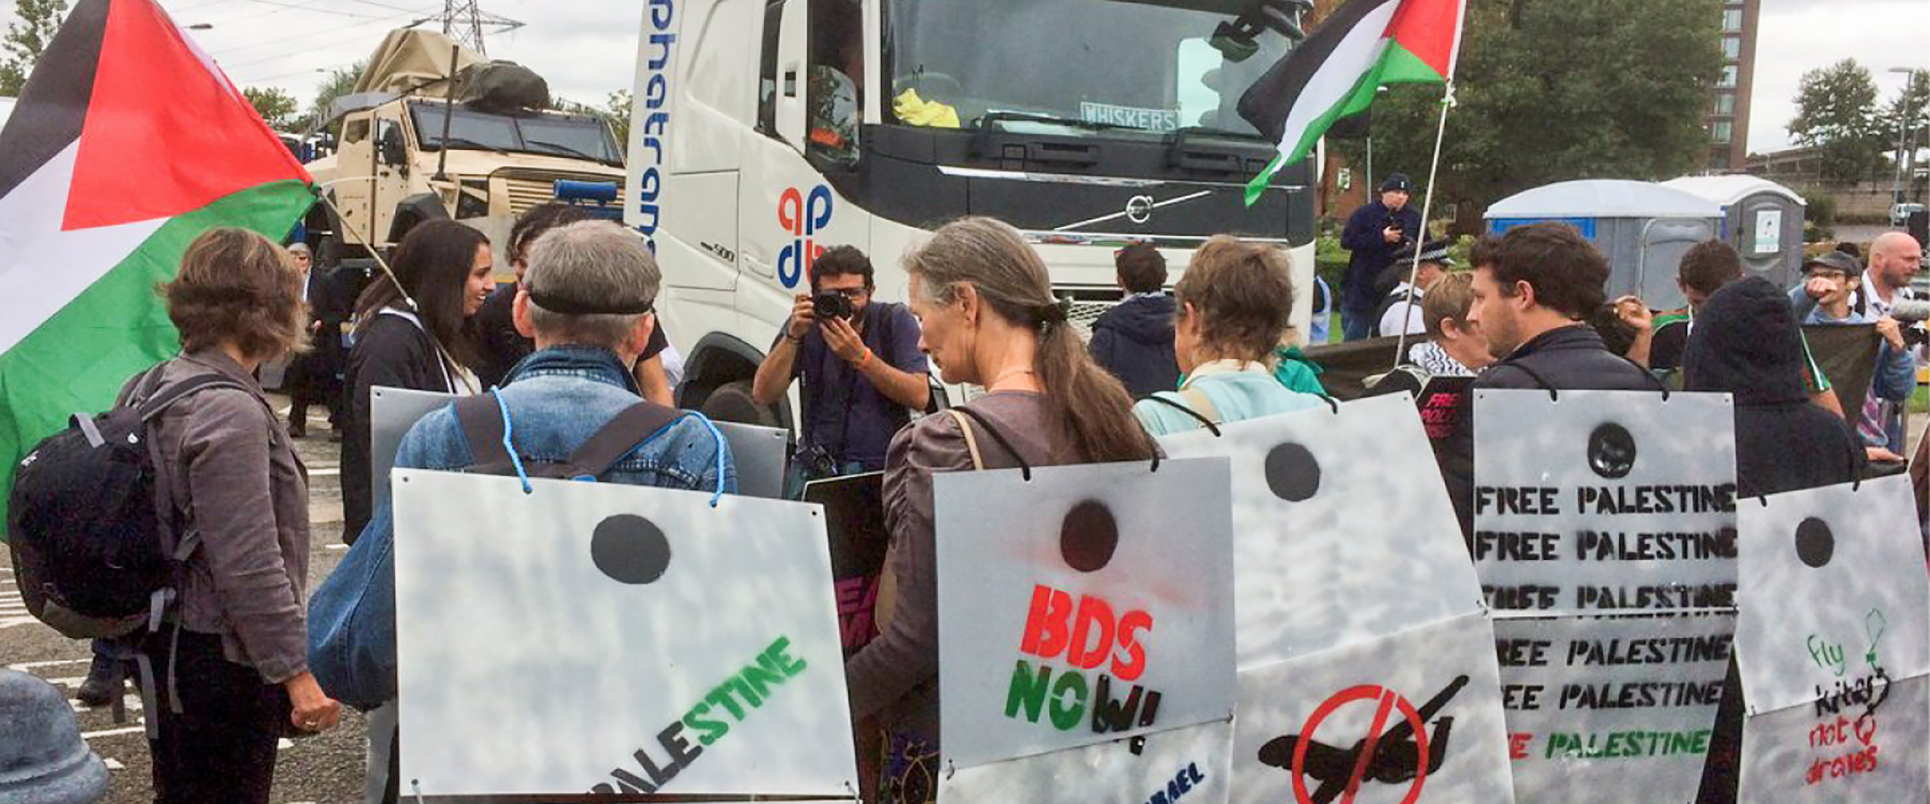 Crowd of activists standing in front of a blocked truck at an arms fair carrying signs saying &quot;BDS Now!&quot; and carrying Palestinian flags.